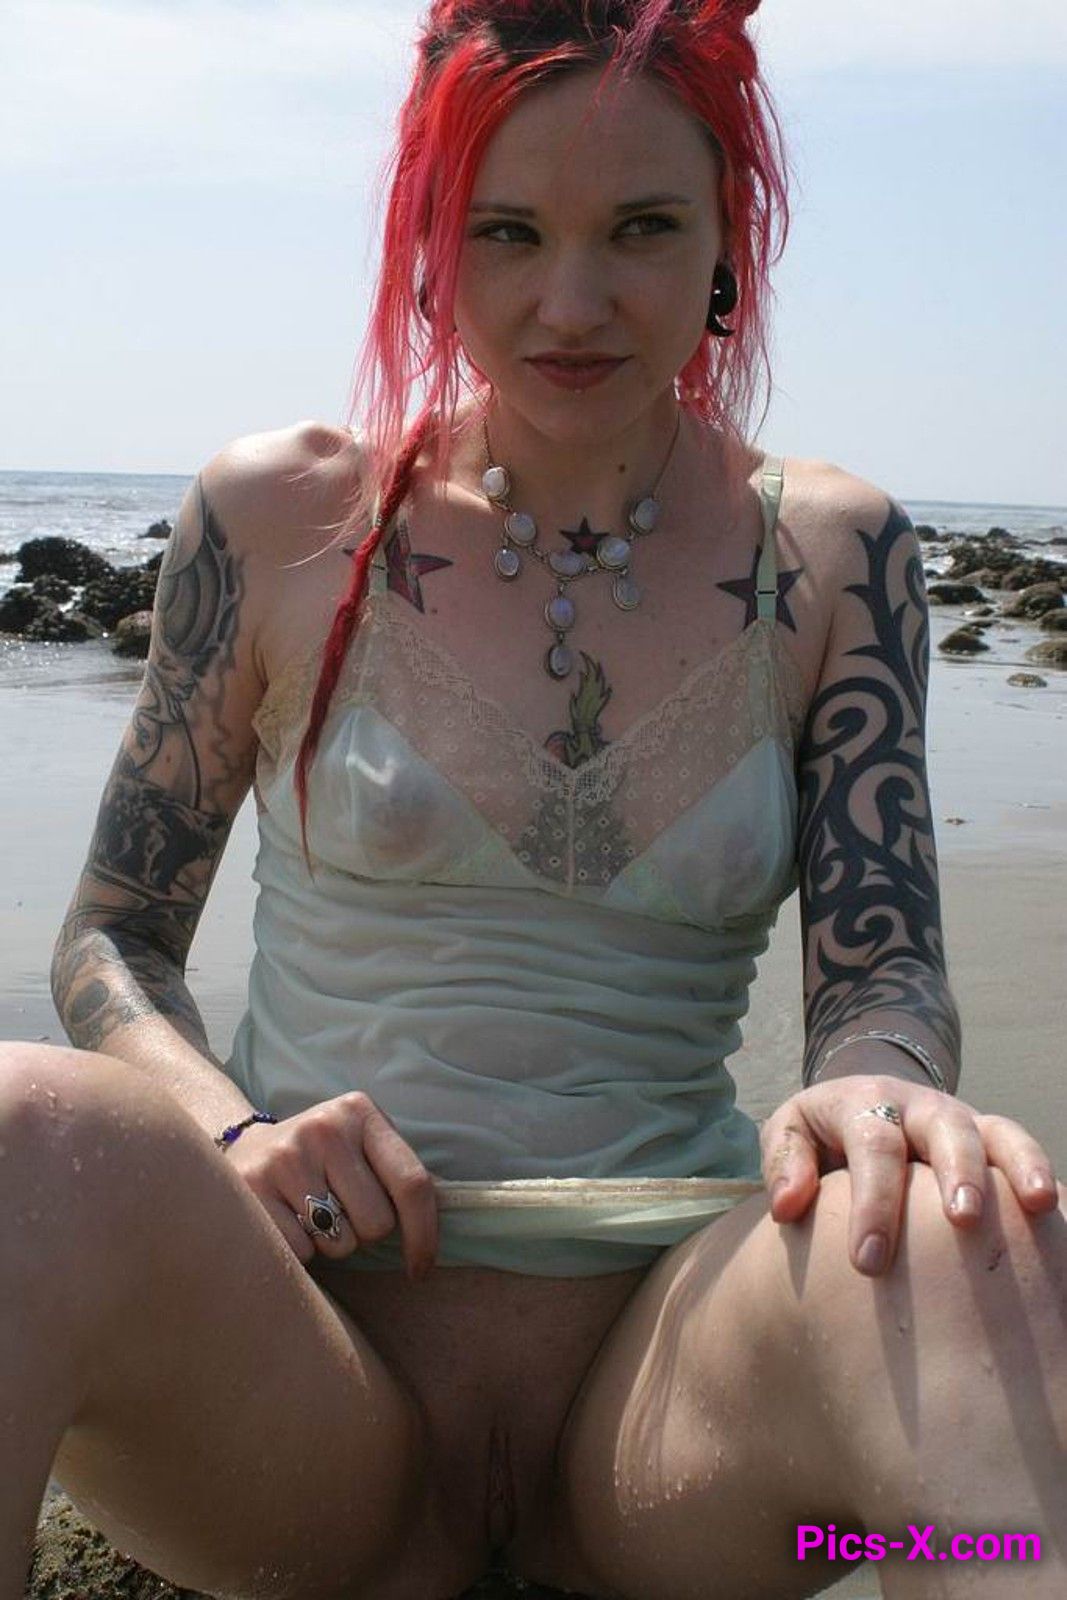 Inked up goth girl playing in the waves at a beach - Punk Rock Girlfriend - Image 24